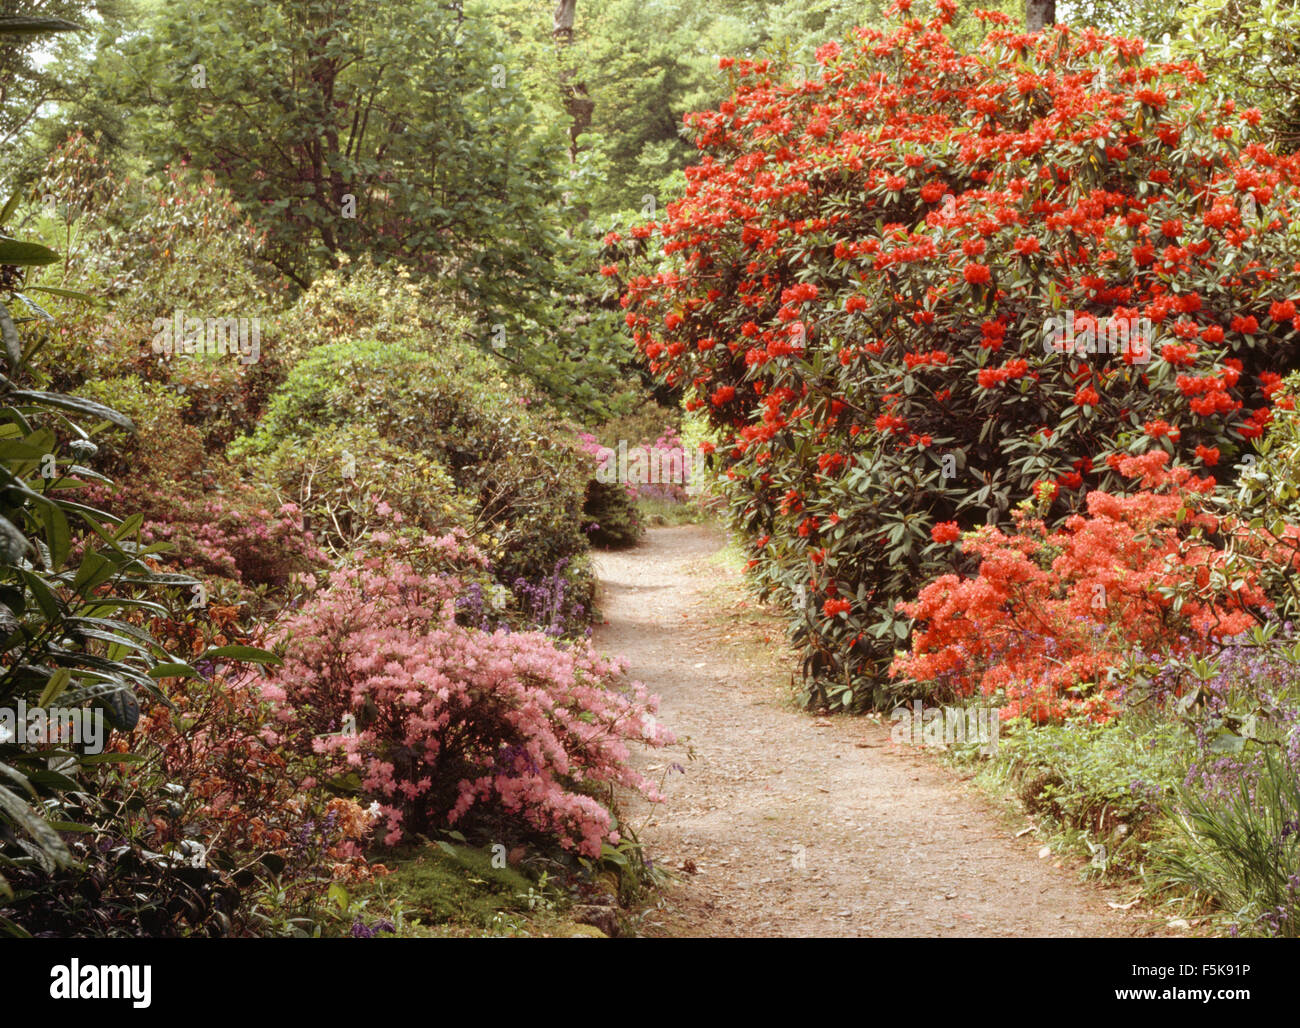 Orange rhododendrons and pink azaleas either side of path in large country garden in Spring Stock Photo